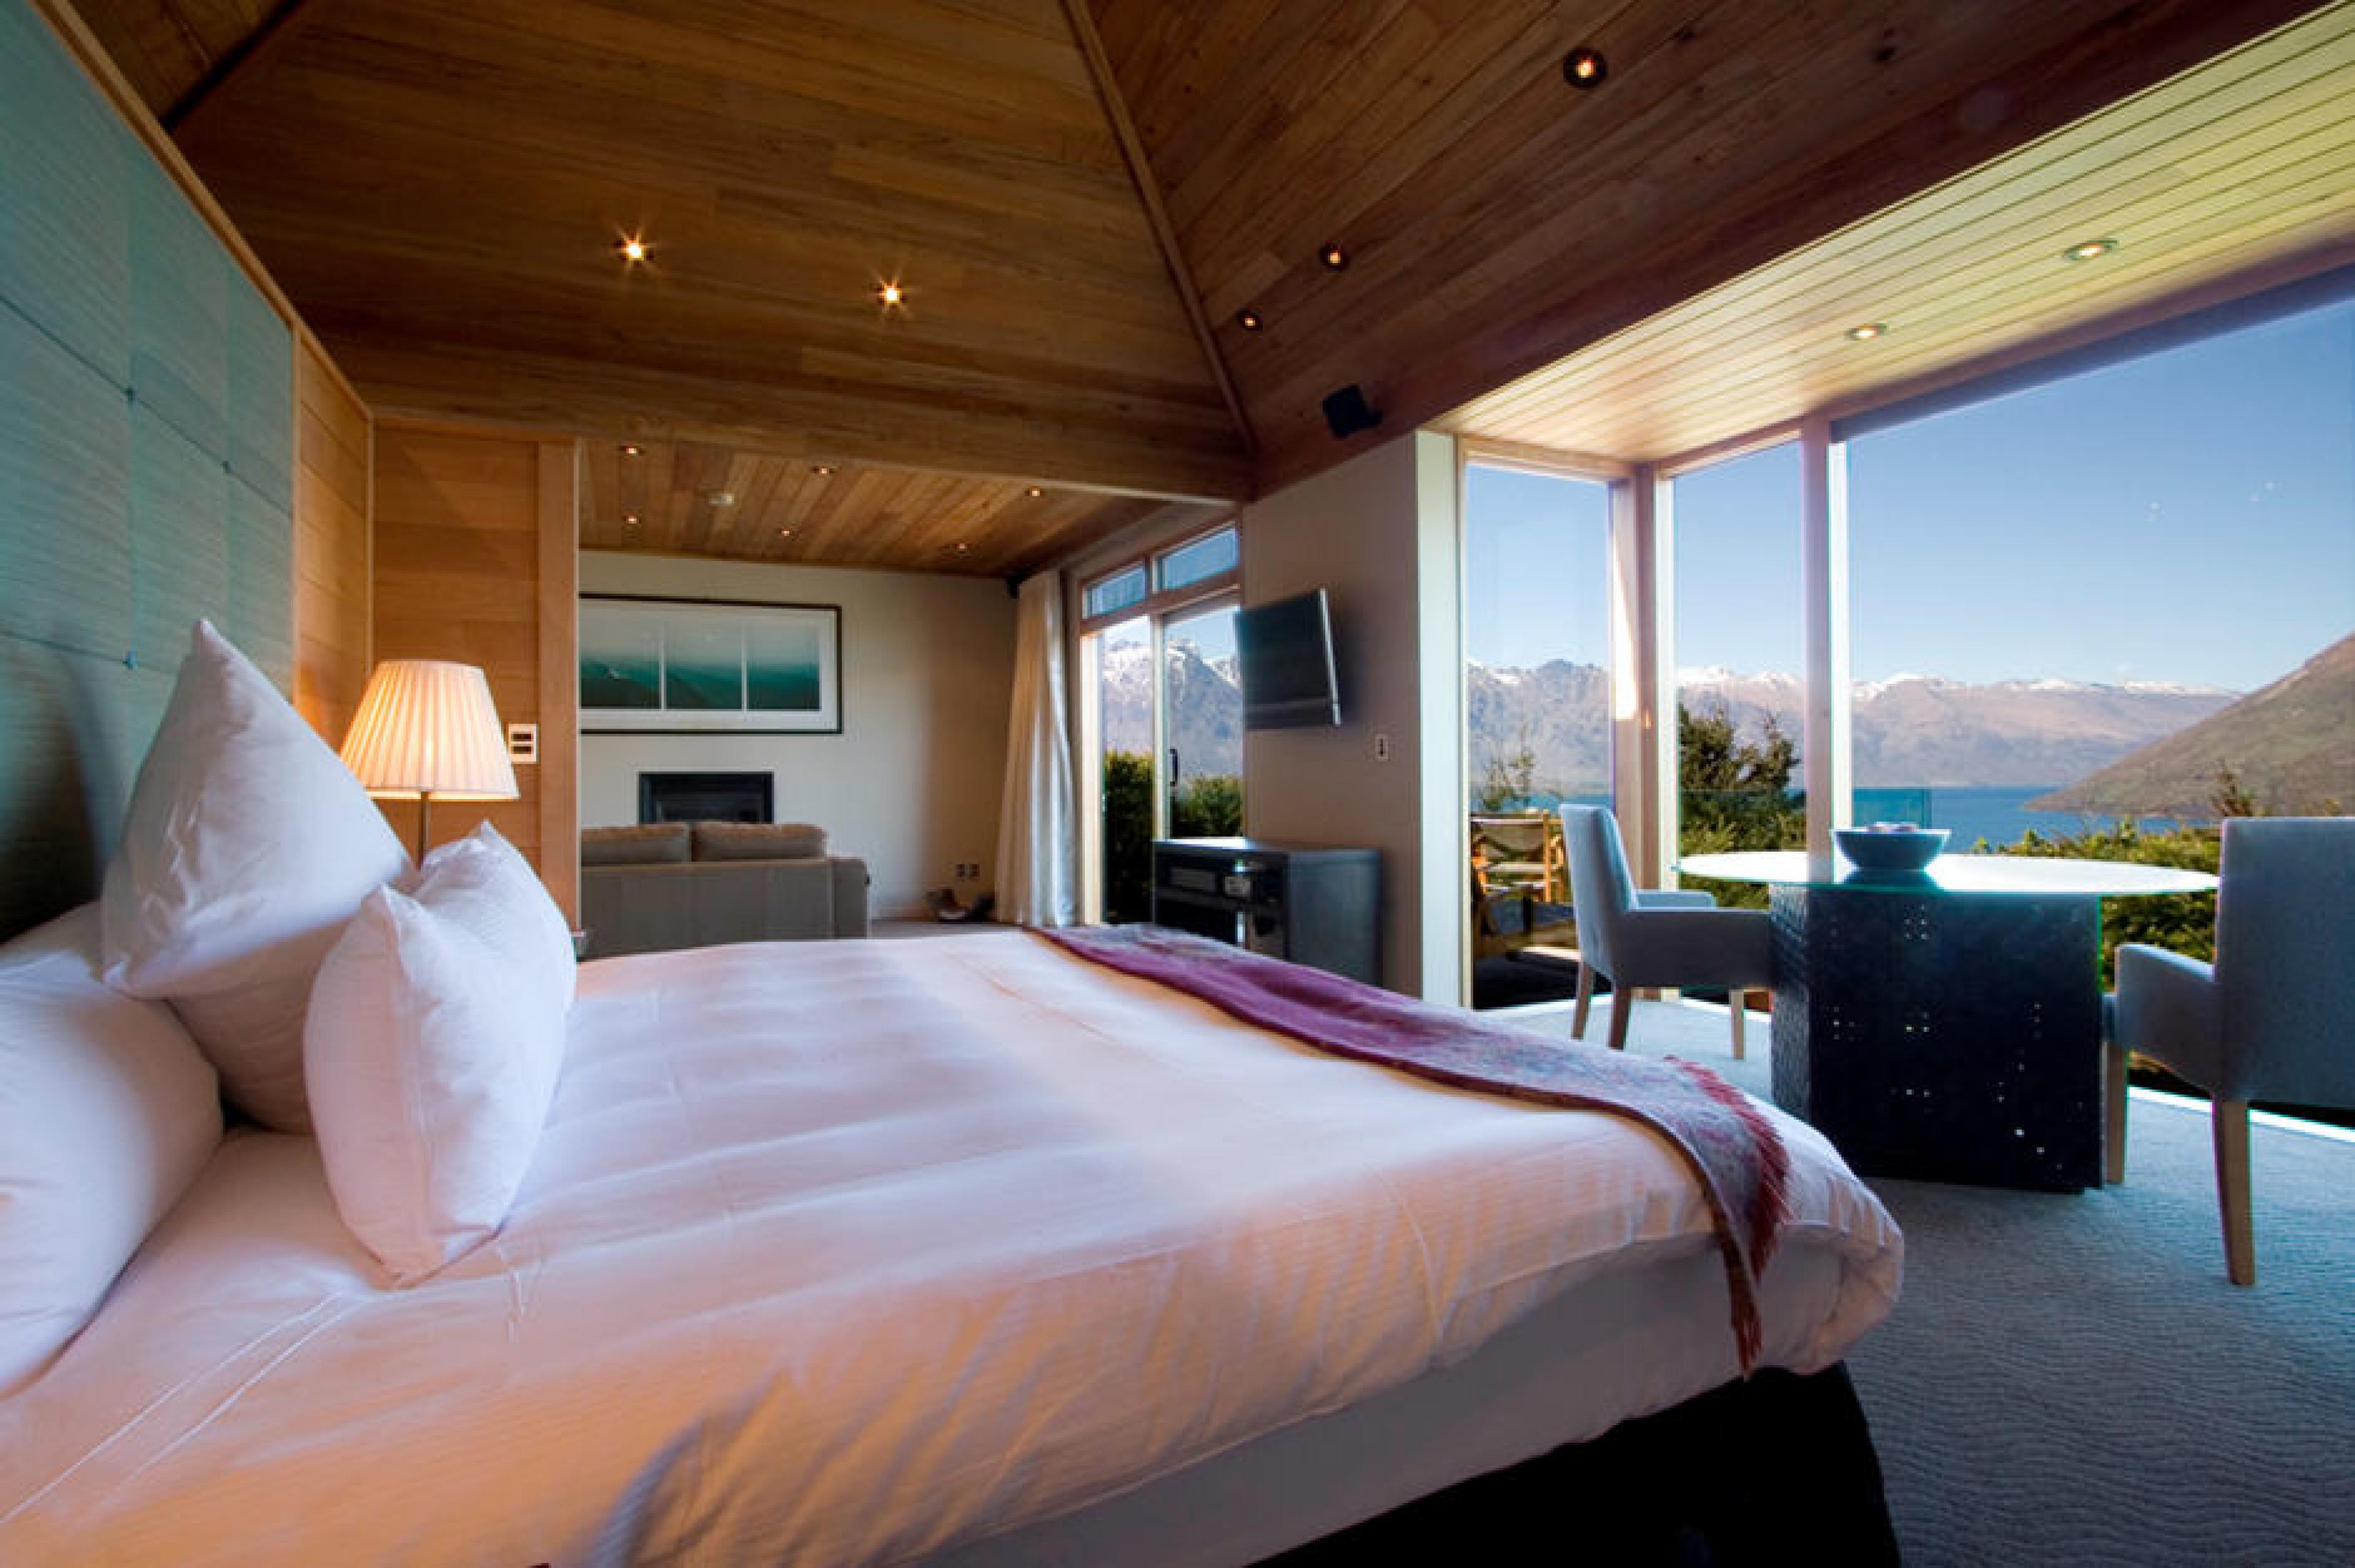 Bedroom at Azur Lodge, Queenstown, New Zealand - Photo Courtesy - Preferred Hotels & Resorts